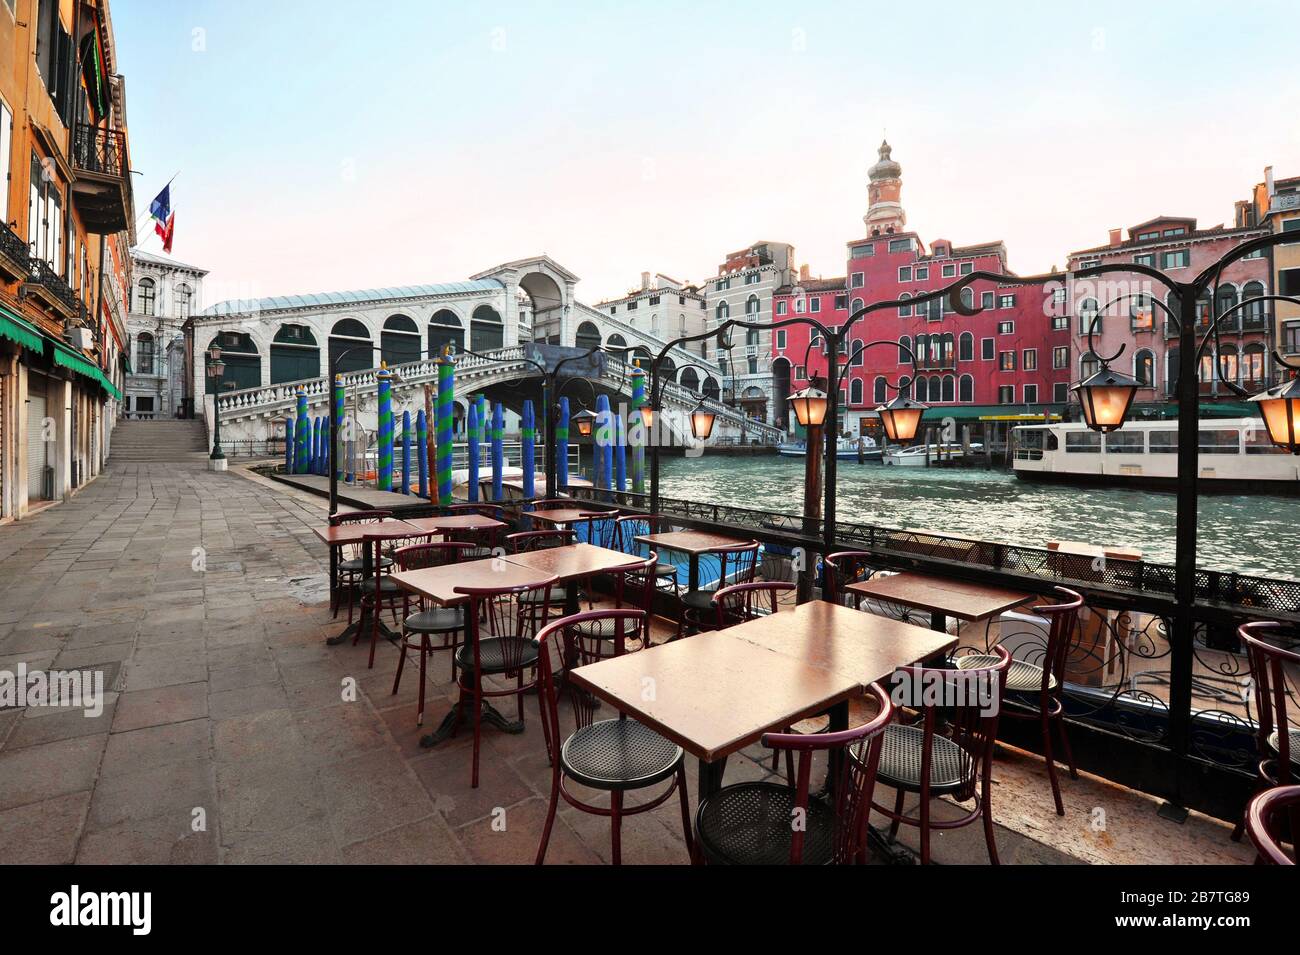 Venice in Italy - Rialto Bridge and Grand Canal with empty embankment, tourist centre of famous city without people Stock Photo